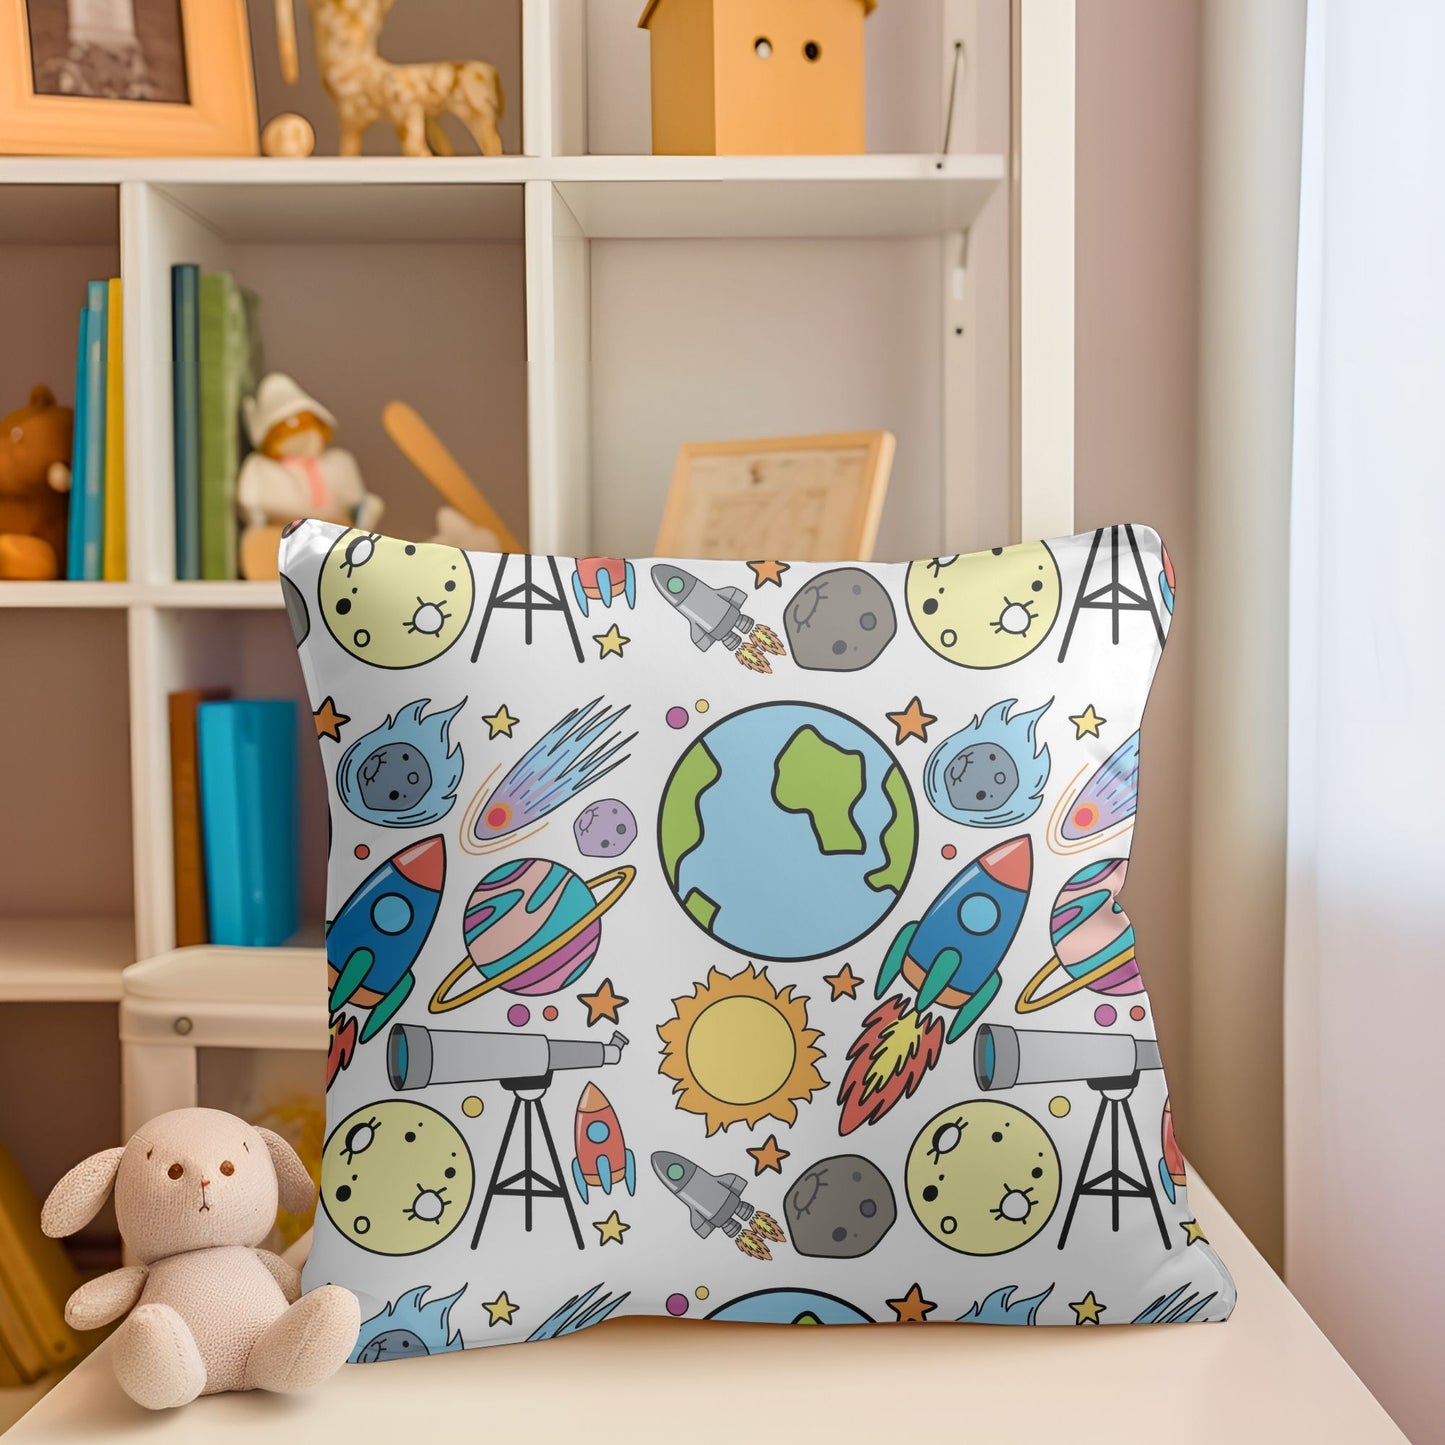 Charming baby room pillow adorned with a skyrockets theme.